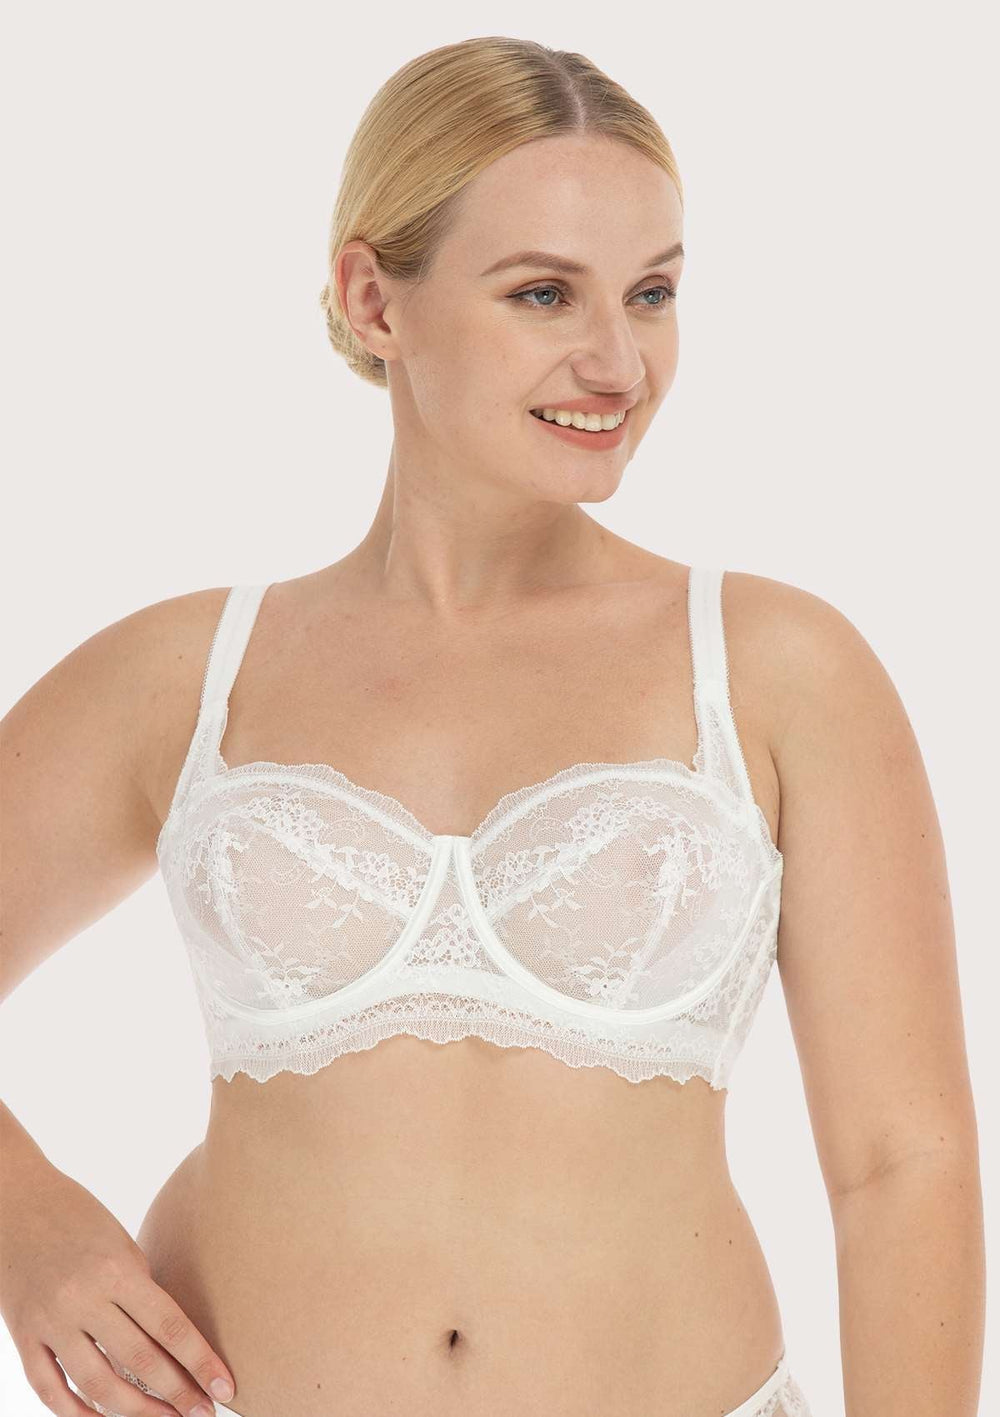 Linking Hearts Embroidery Unlined Lace Balconette Bra